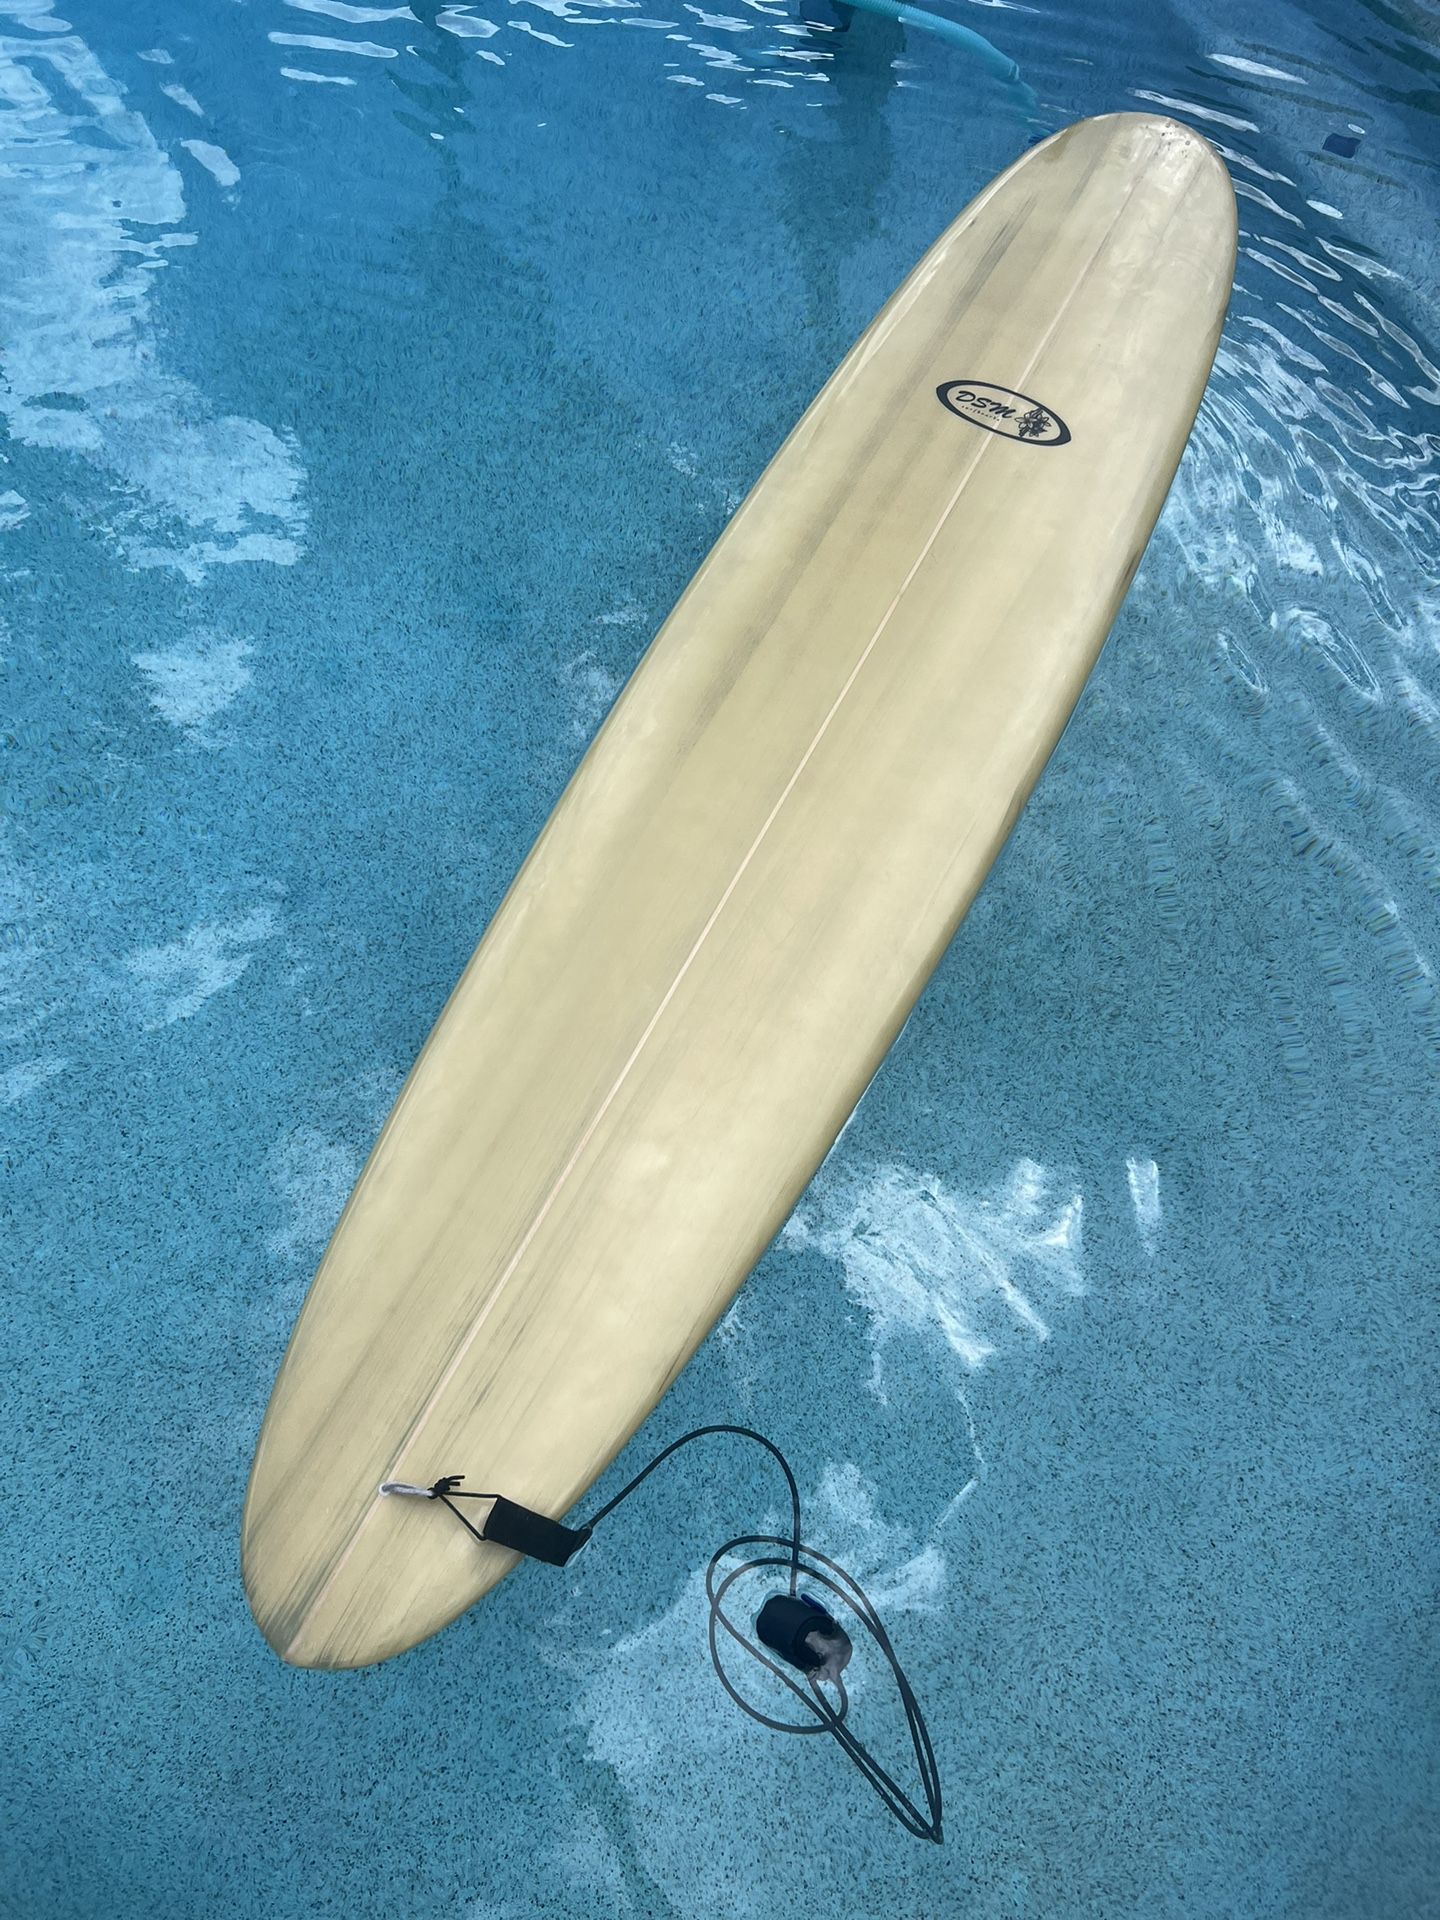 DSM Custom Shapes Longboard Surfboard 9’-2” Excellent Condition!